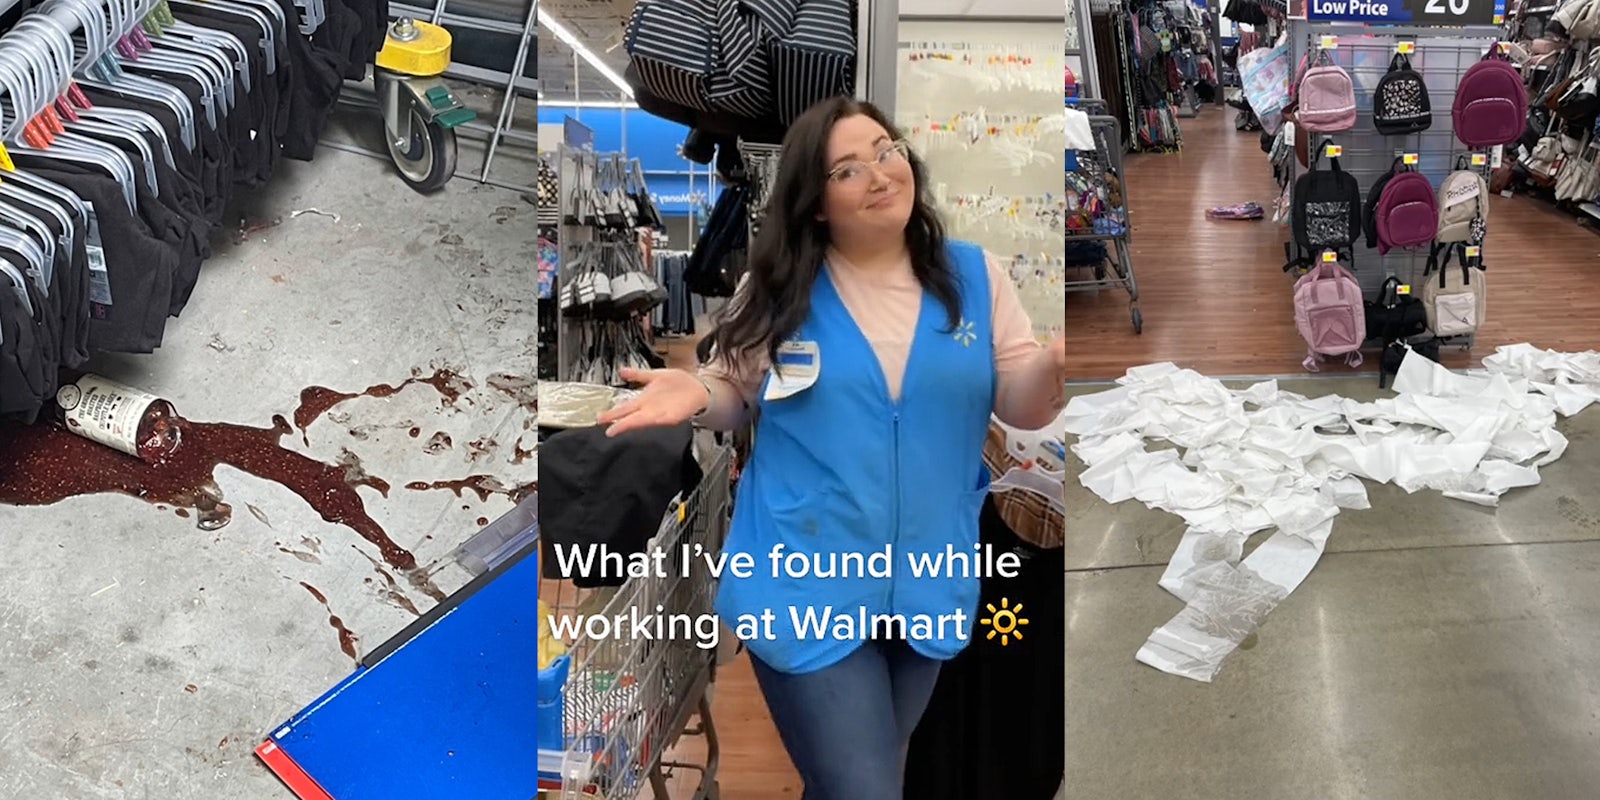 spilled can of brown substance in on floor next to pants on rack in Walmart (l) Walmart worker arms up caption 'What I've found while working at Walmart' (c) Walmart floor covered in soaking wet paper towels next to backpacks on rack (r)